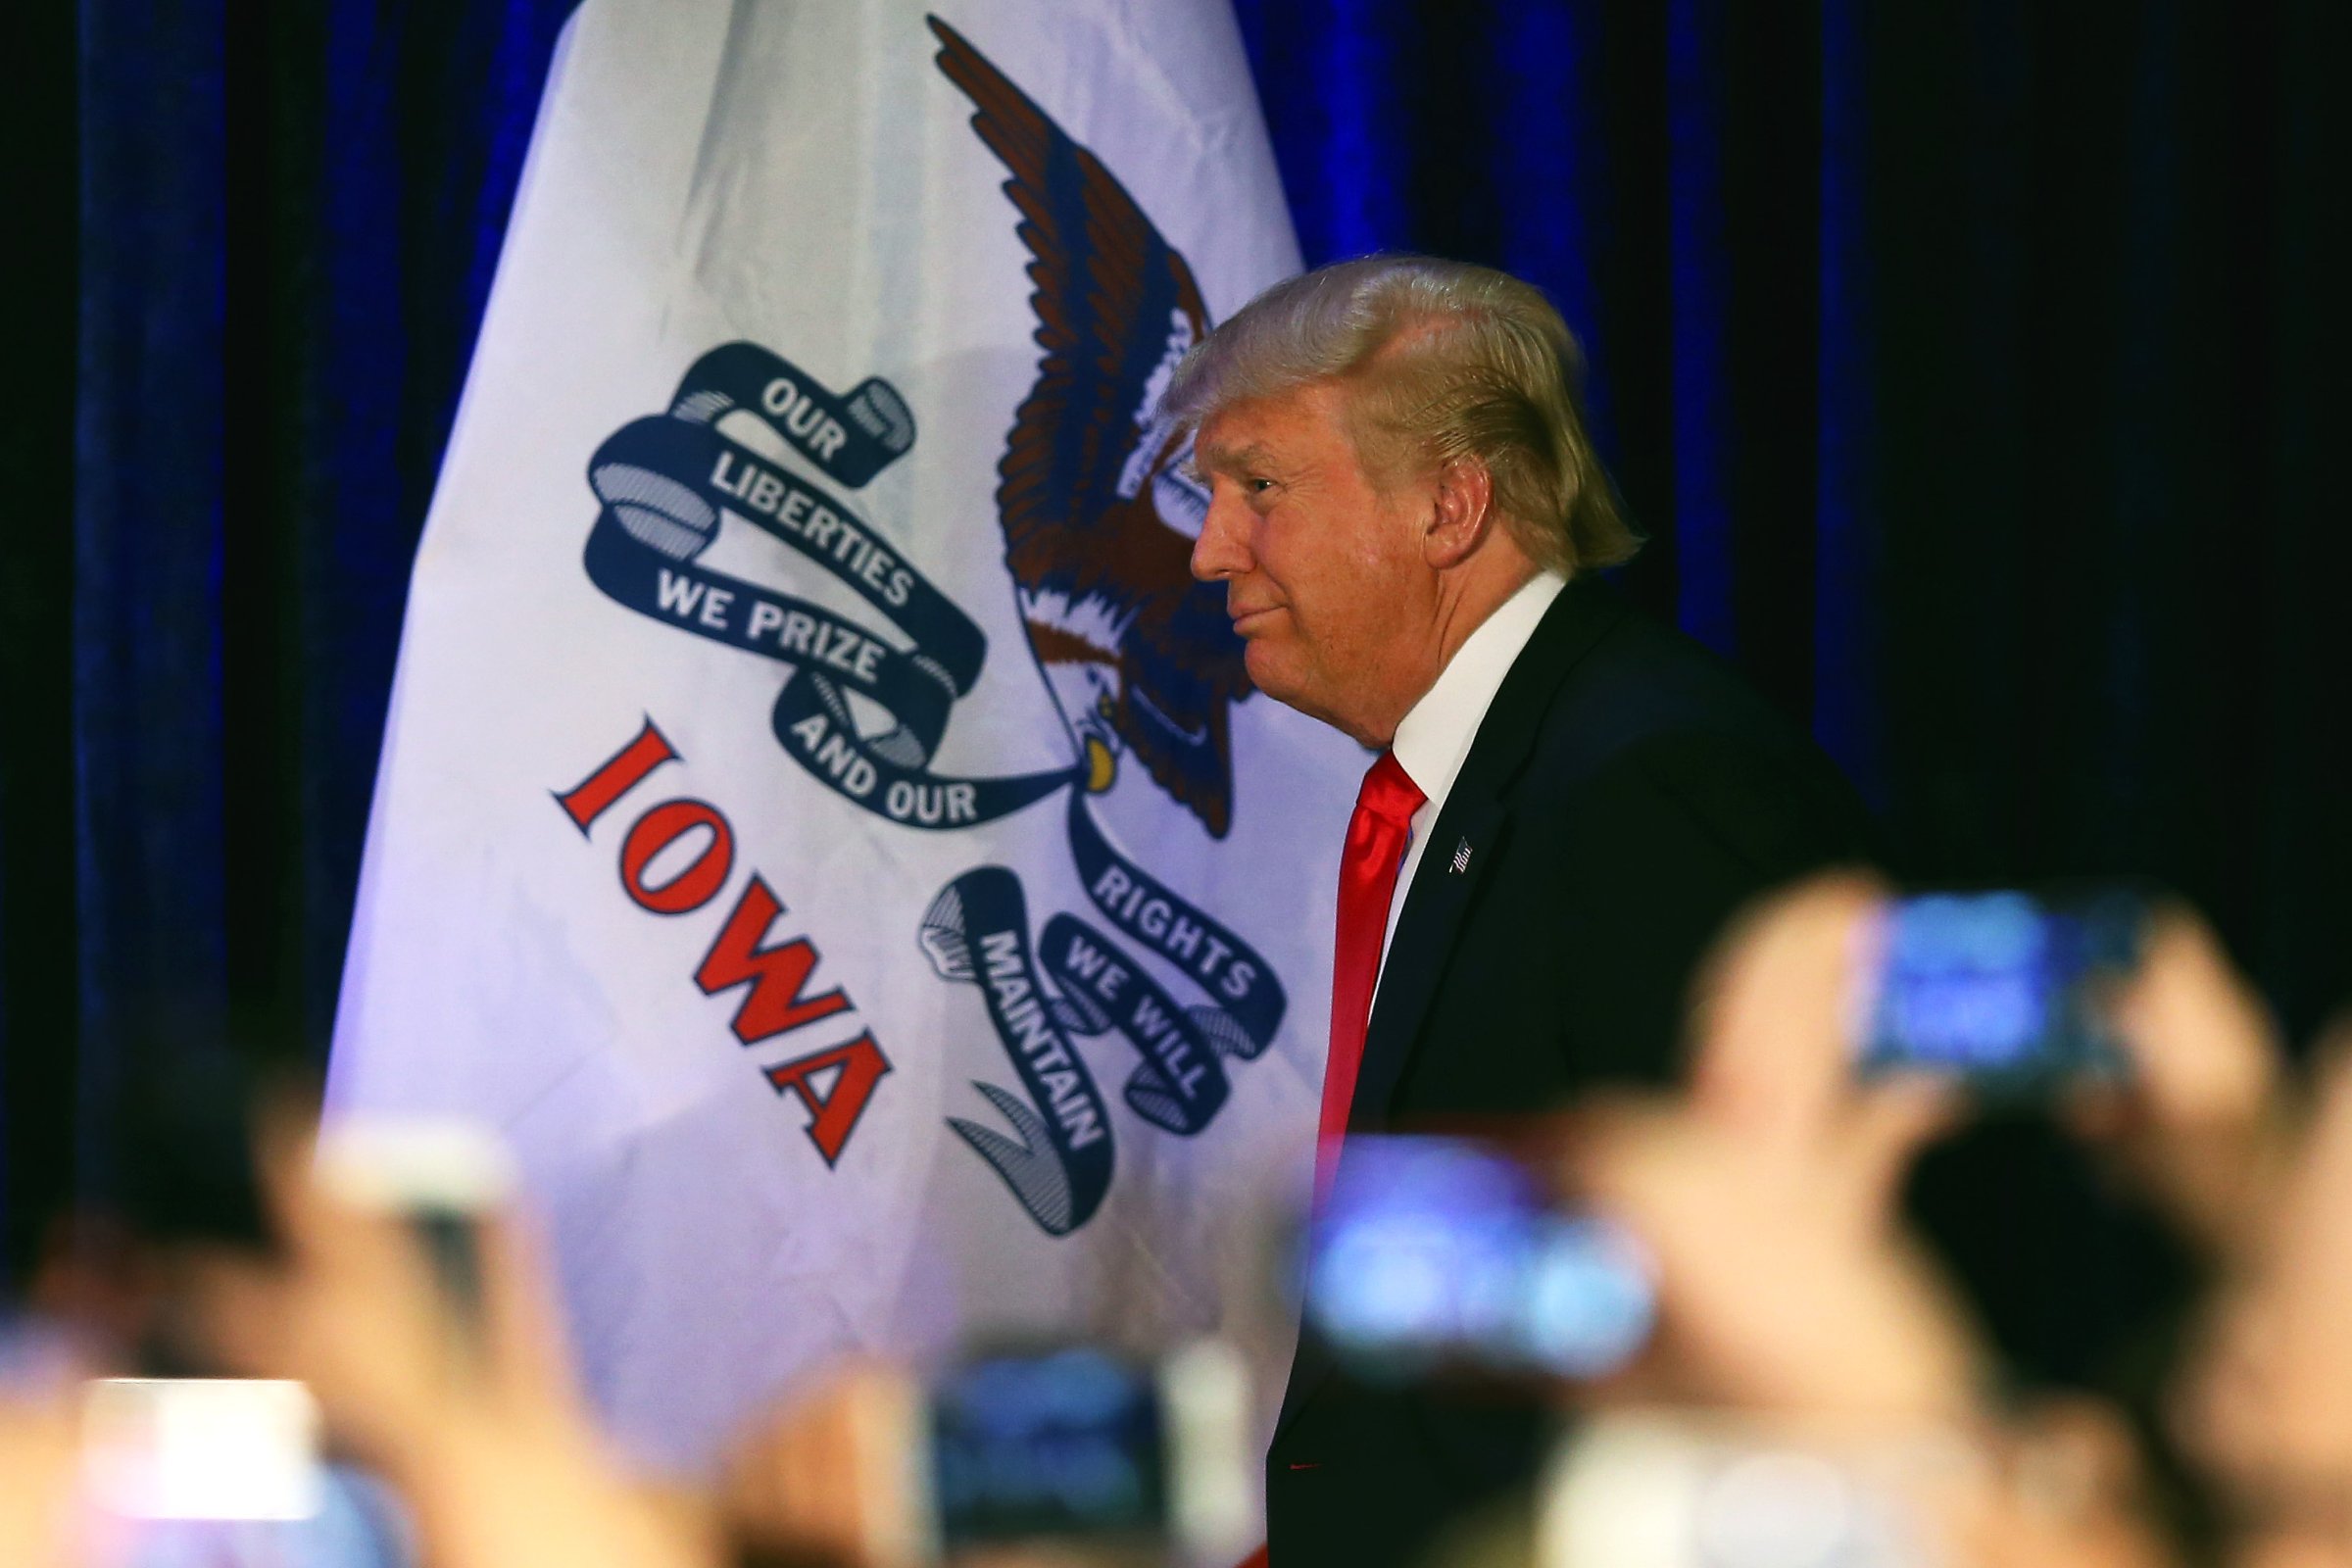 Republican presidential candidate Donald Trump appears at his Iowa Caucus night gathering Feb. 1, 2016 in Des Moines, Iowa.